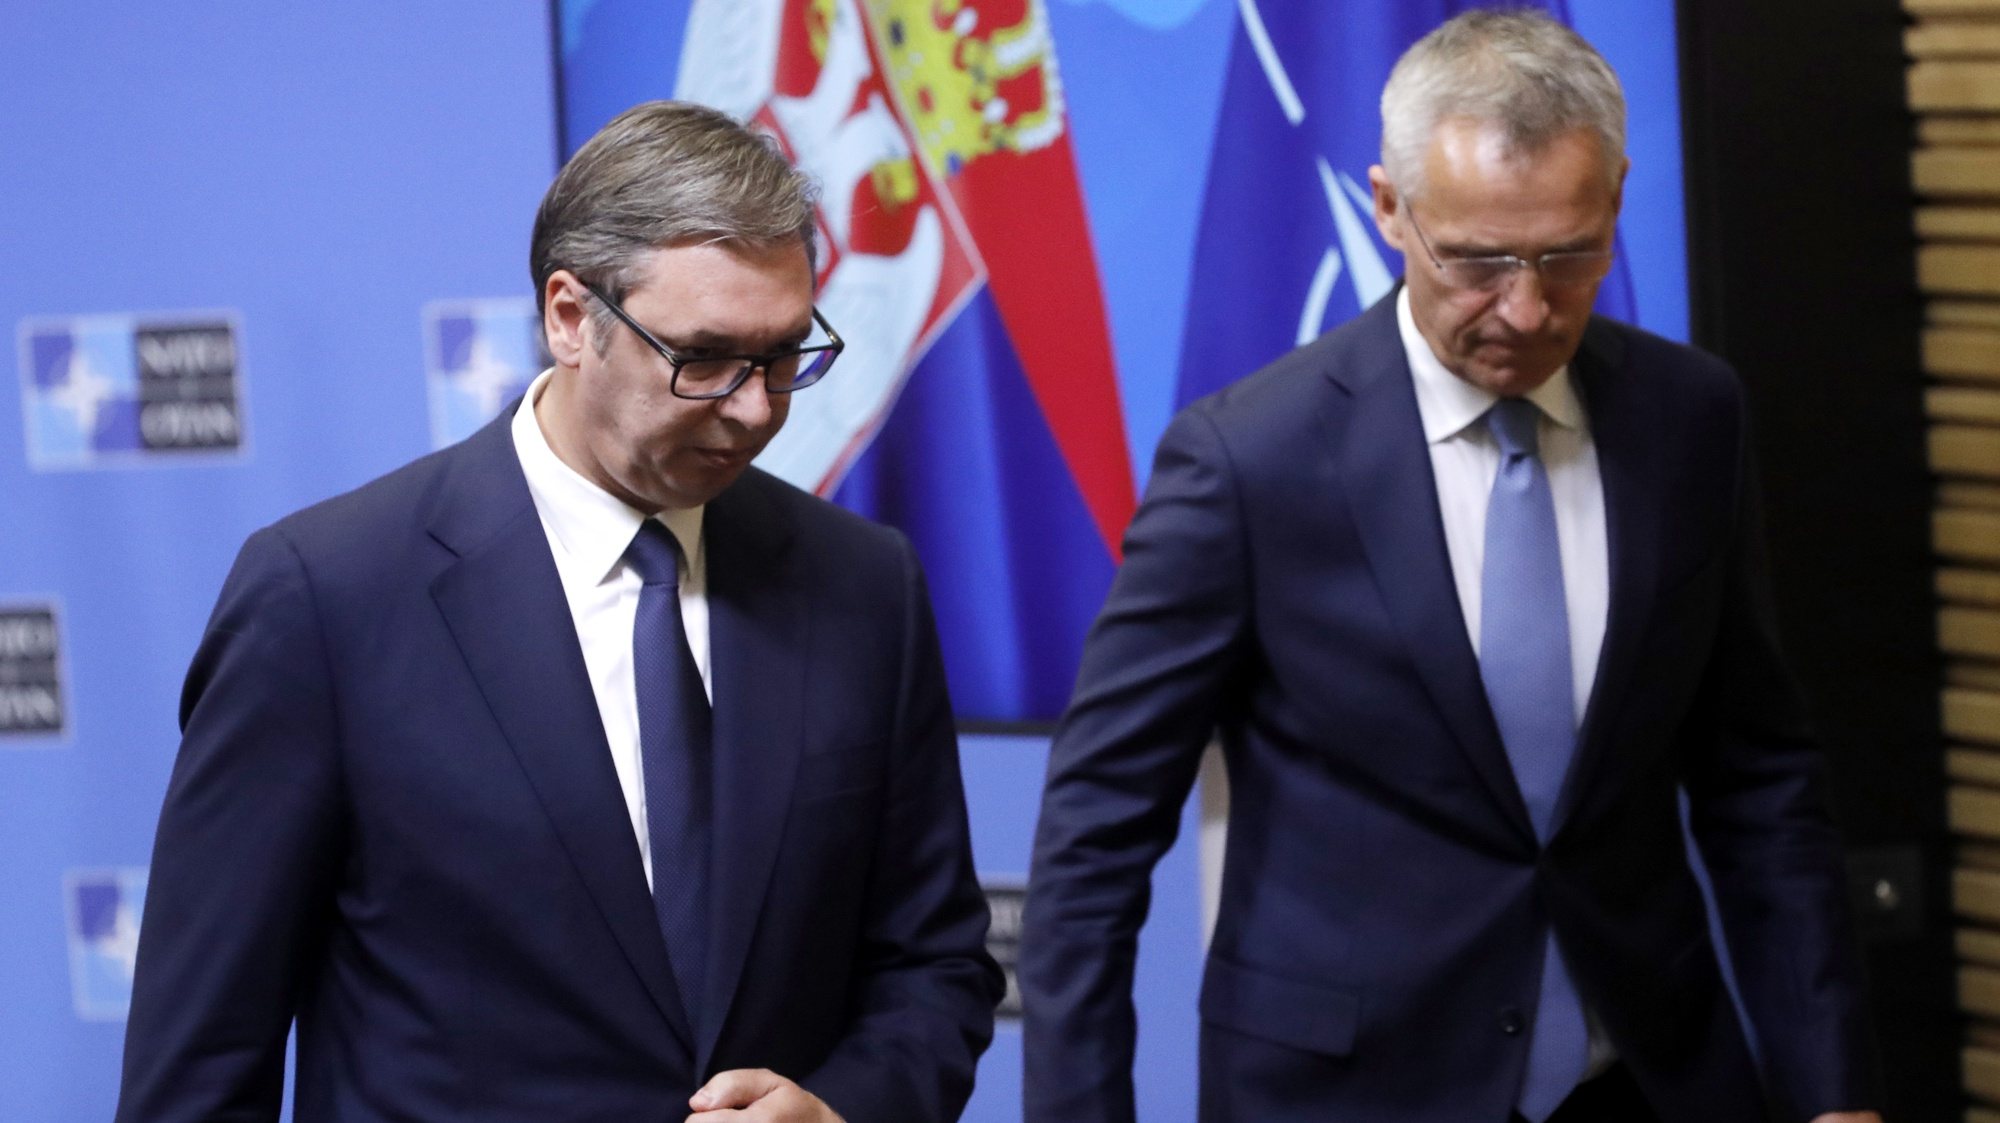 epa10125712 NATO Secretary General Jens Stoltenberg (R) and the President of the Republic of Serbia Aleksandar Vucic leave after they give a joint press conference following their meeting at the Alliance headquarters in Brussels, Belgium, 17 August 2022.  EPA/OLIVIER HOSLET